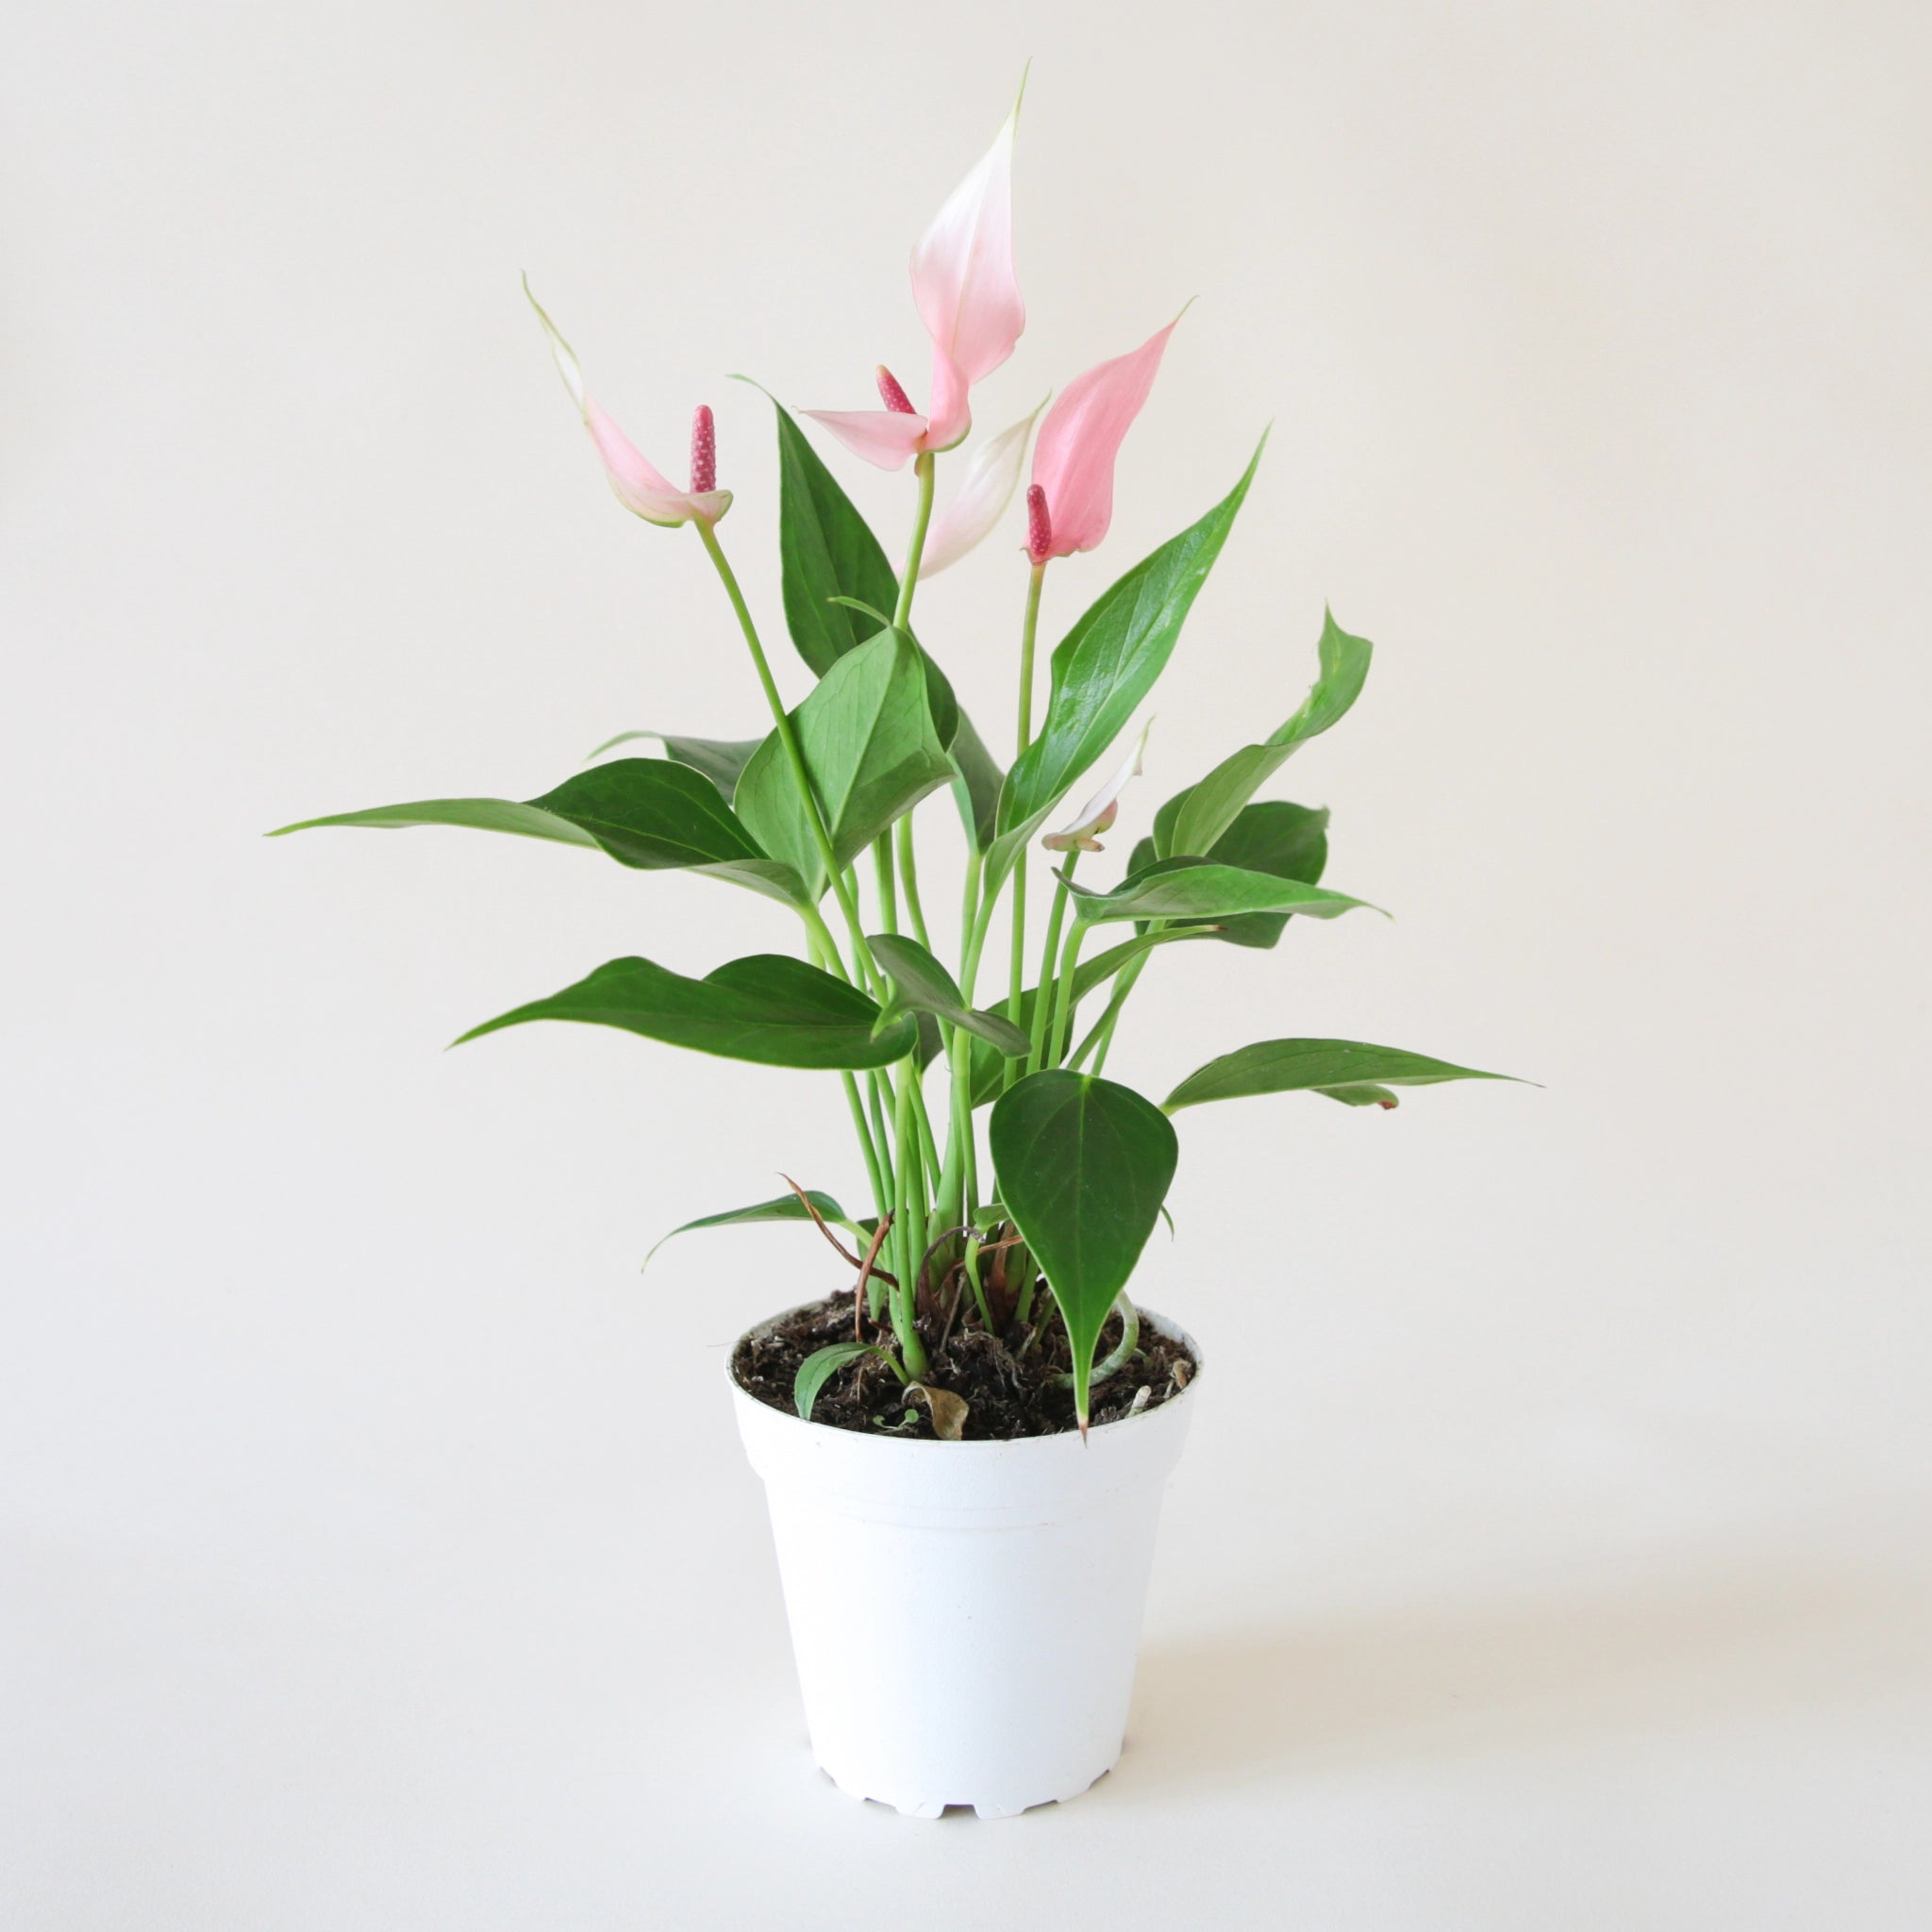 Anthurium "Lilli" Light Pink in a round white pot. Anthurium is a green leafy plant with tall bright pink arrowhead shape flowers and dark pink stamen.